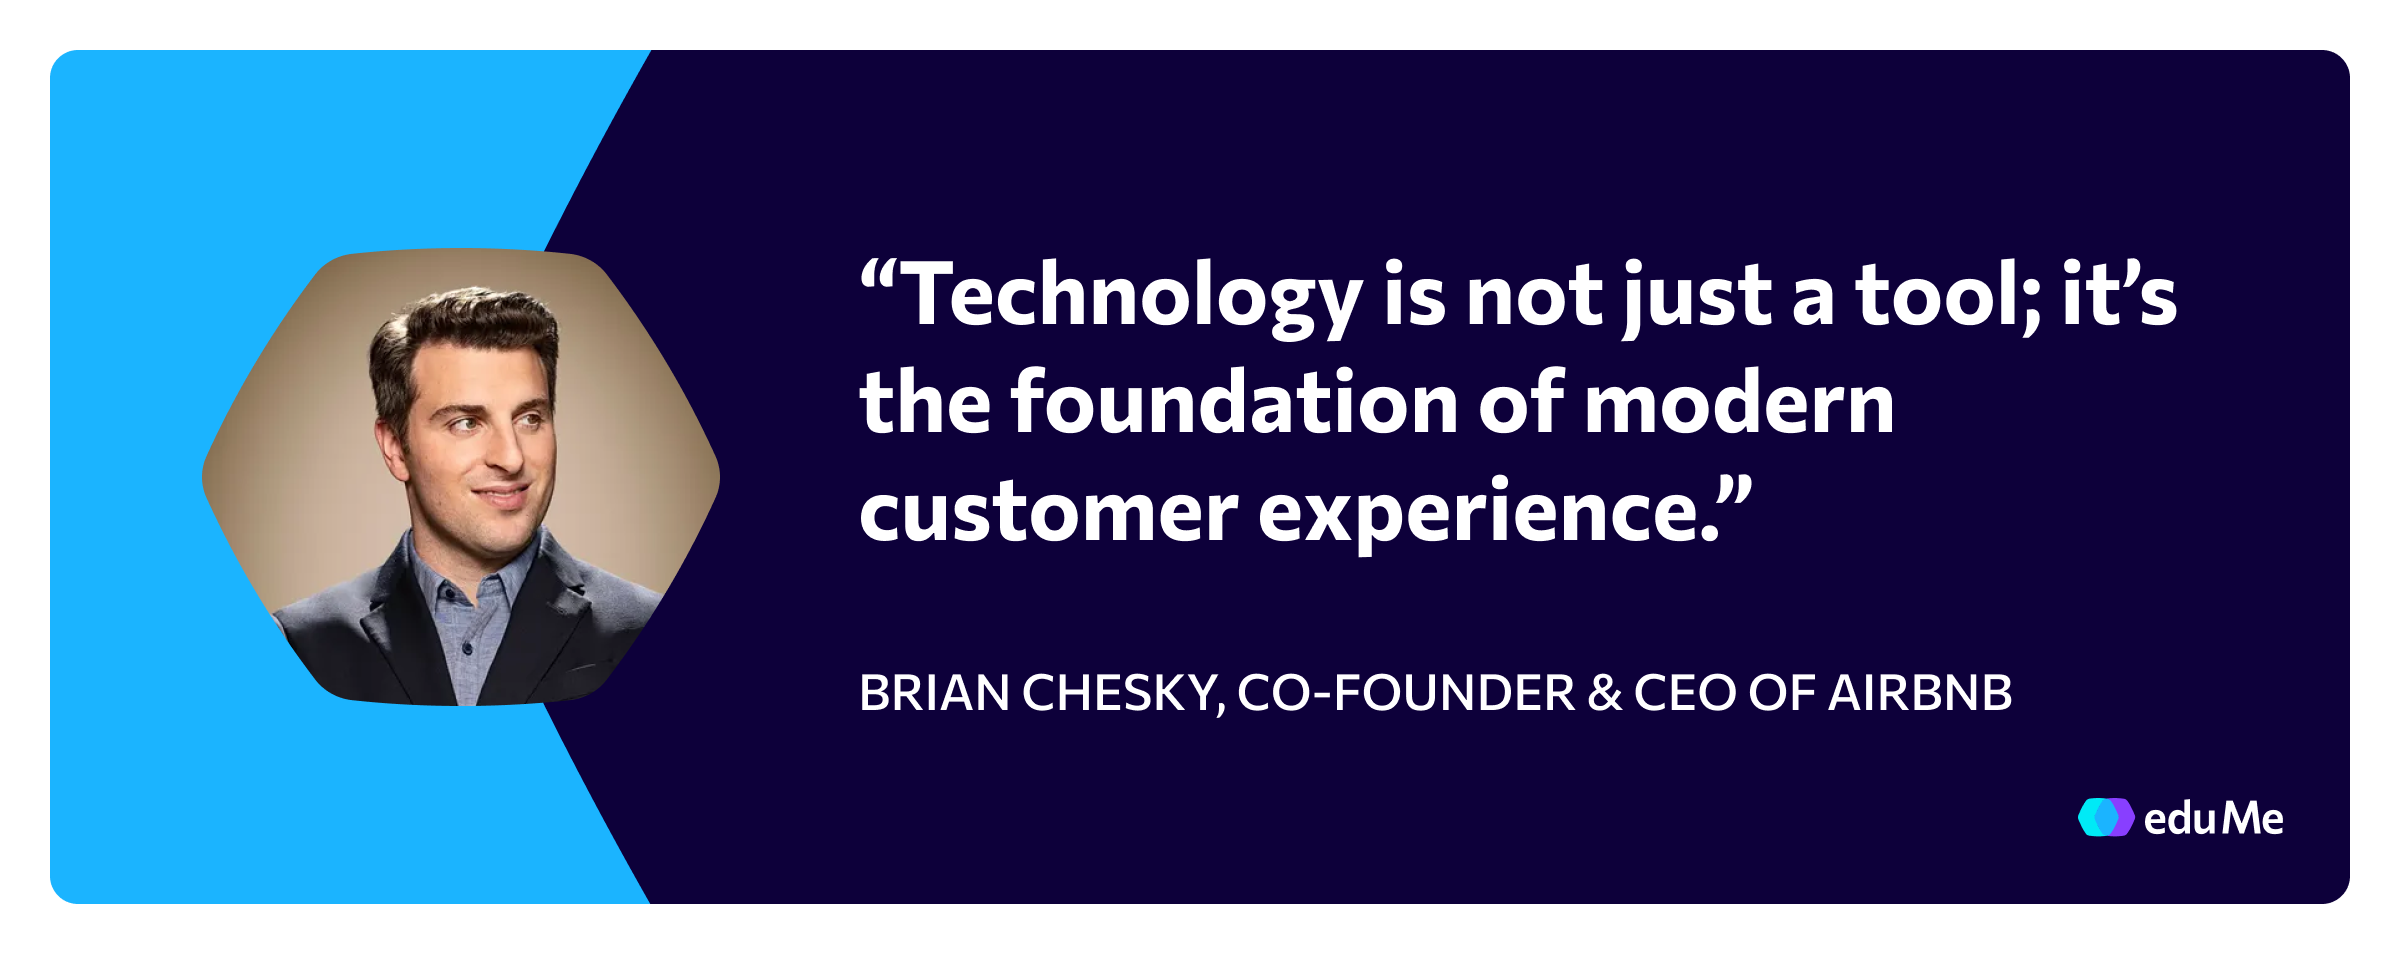 Customer experience quote, Brian Chesky Airbnb